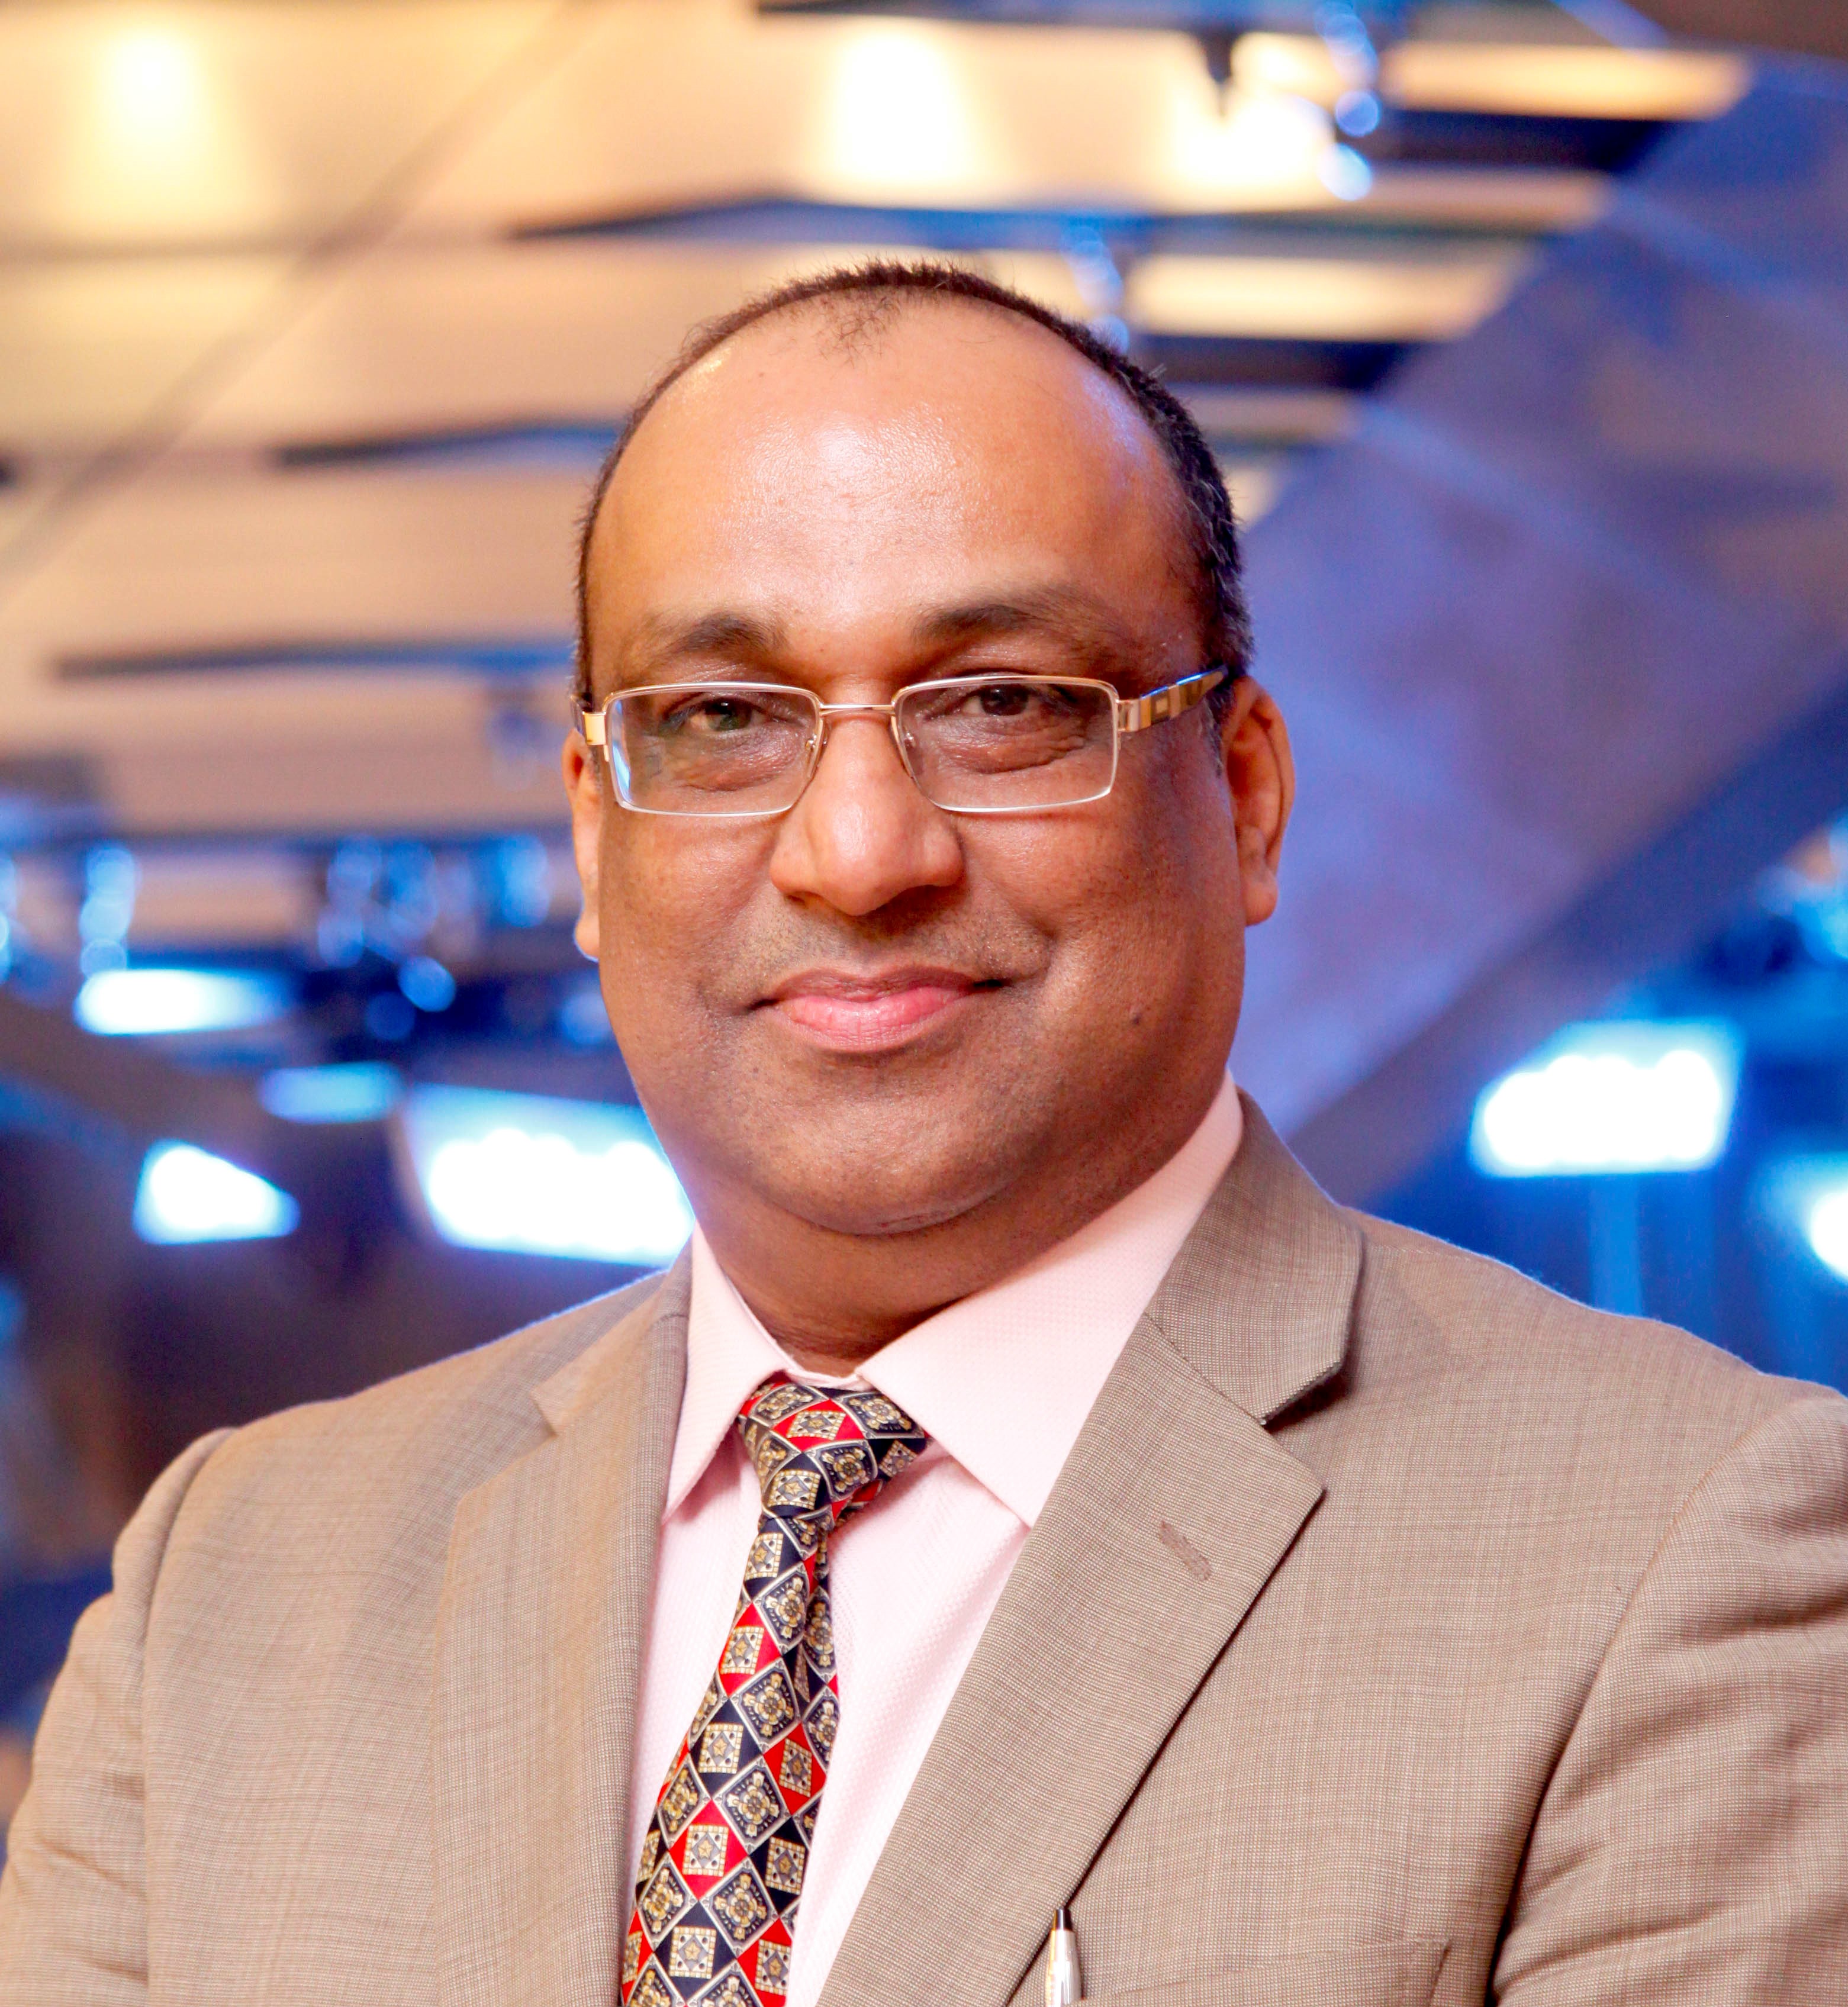 Pavan Choudary, <span>Chairman & Director General <br> Medical Technology Association of India (MTaI)</span>